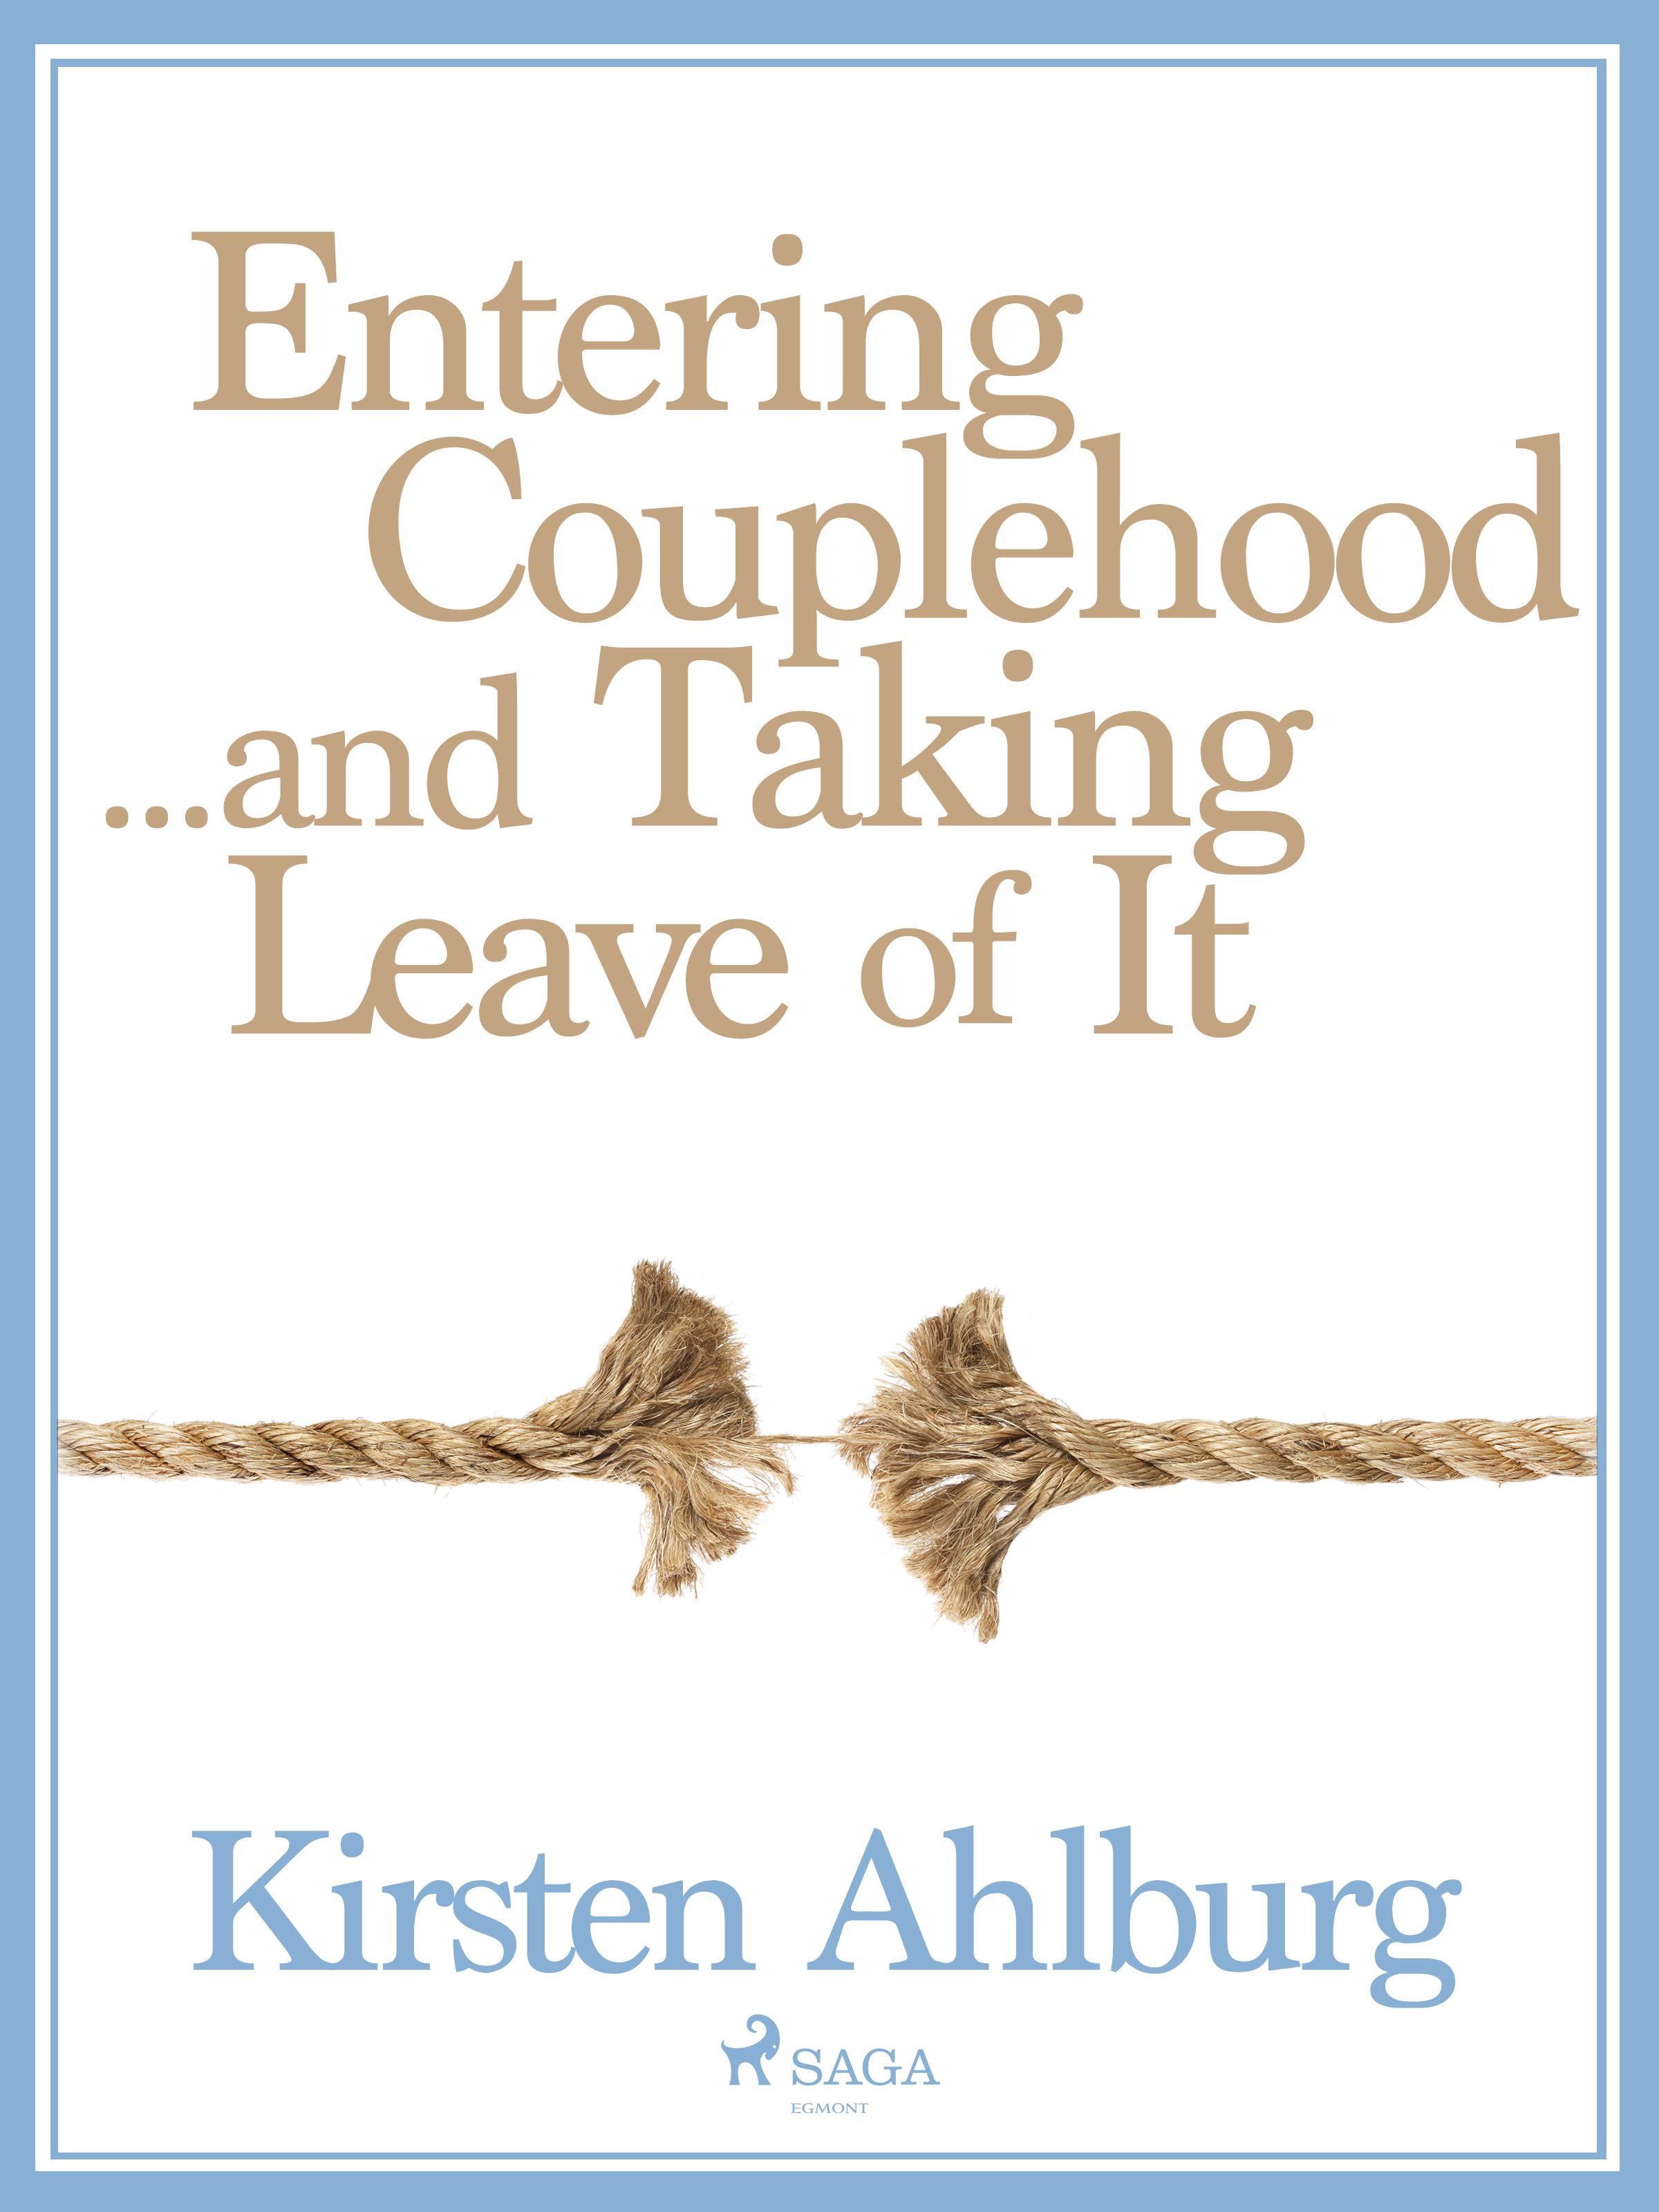 Entering Couplehood...and Taking Leave of It, eBook by Kirsten Ahlburg